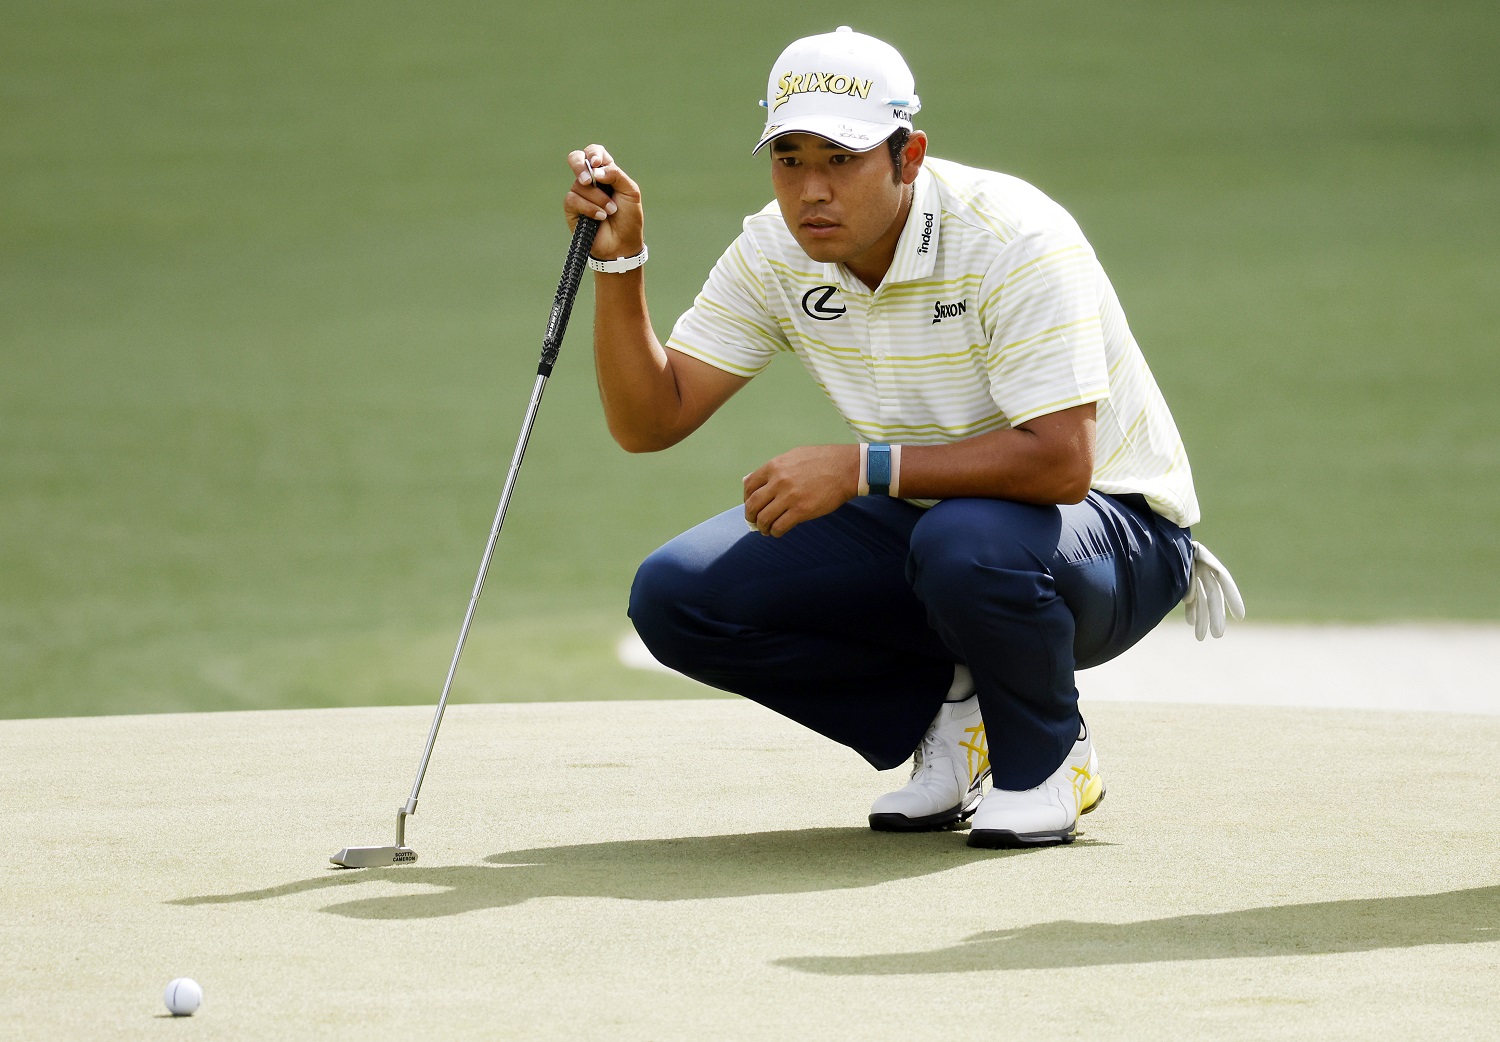 Hideki Matsuyama of Japan looks over a putt on the sixth green during the final round of The Masters at Augusta National Golf Club on April 11, 2021.